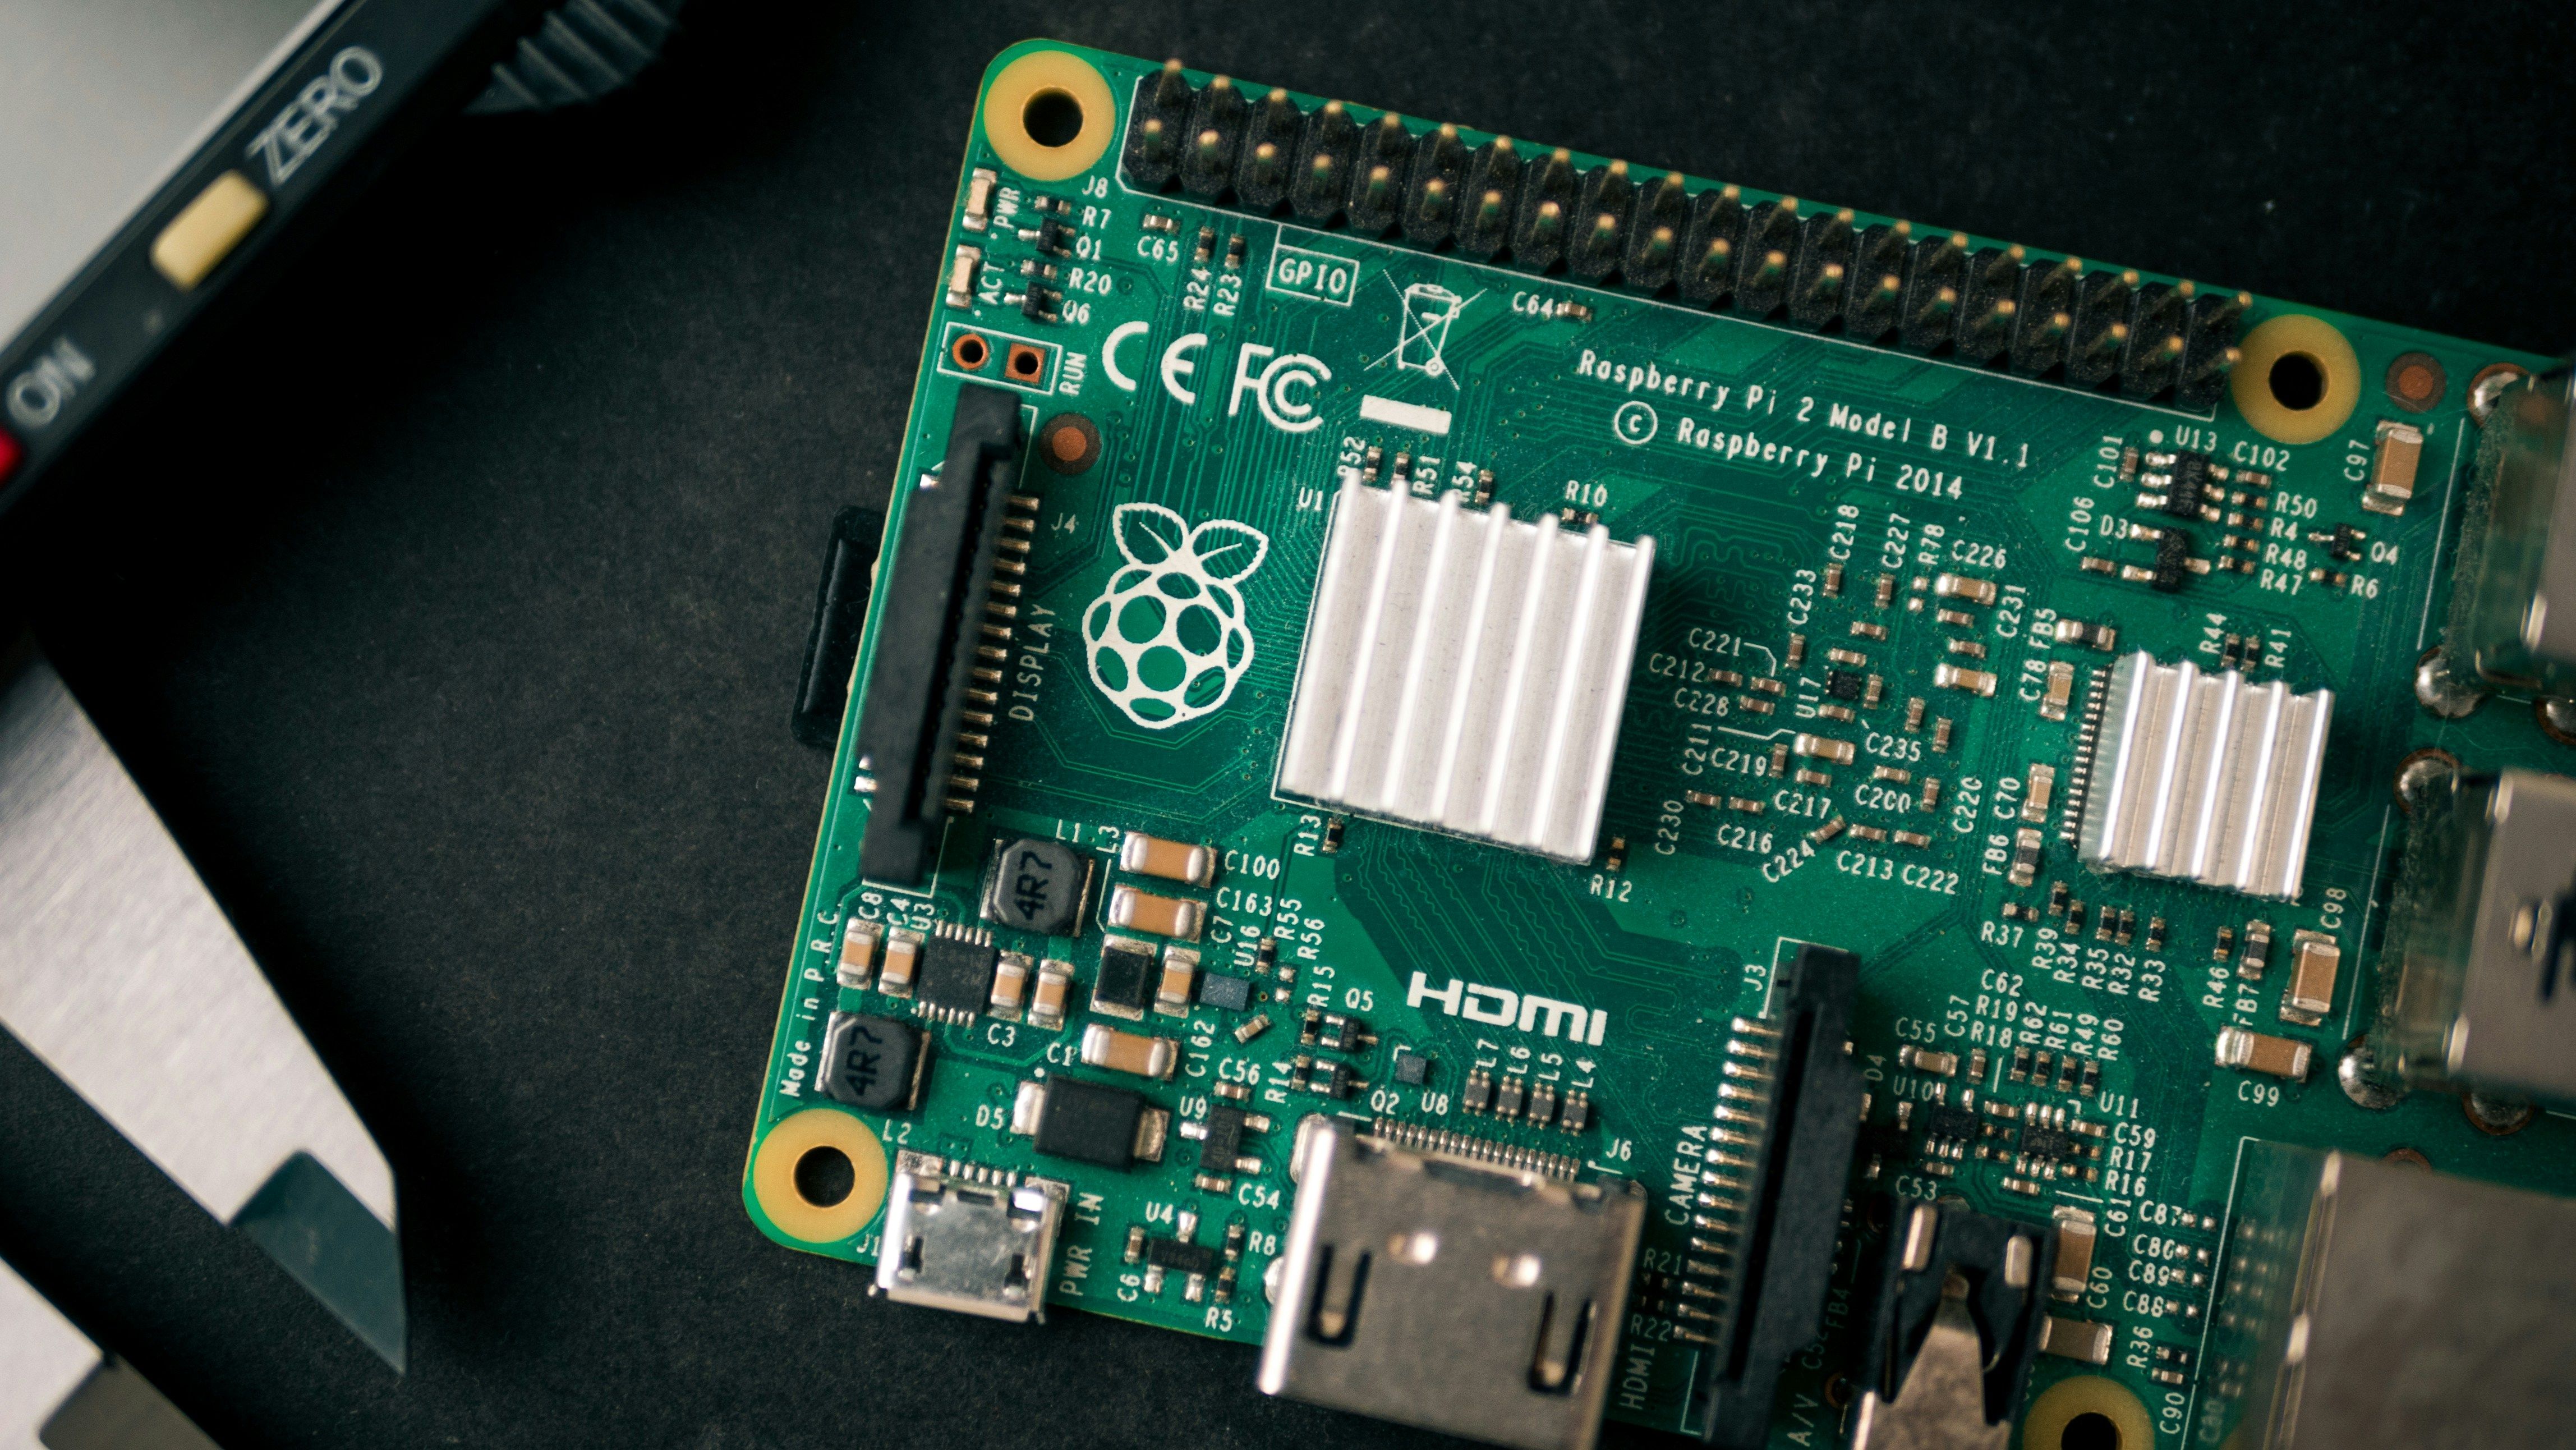 Top-down image of a raspberry pi model 2.